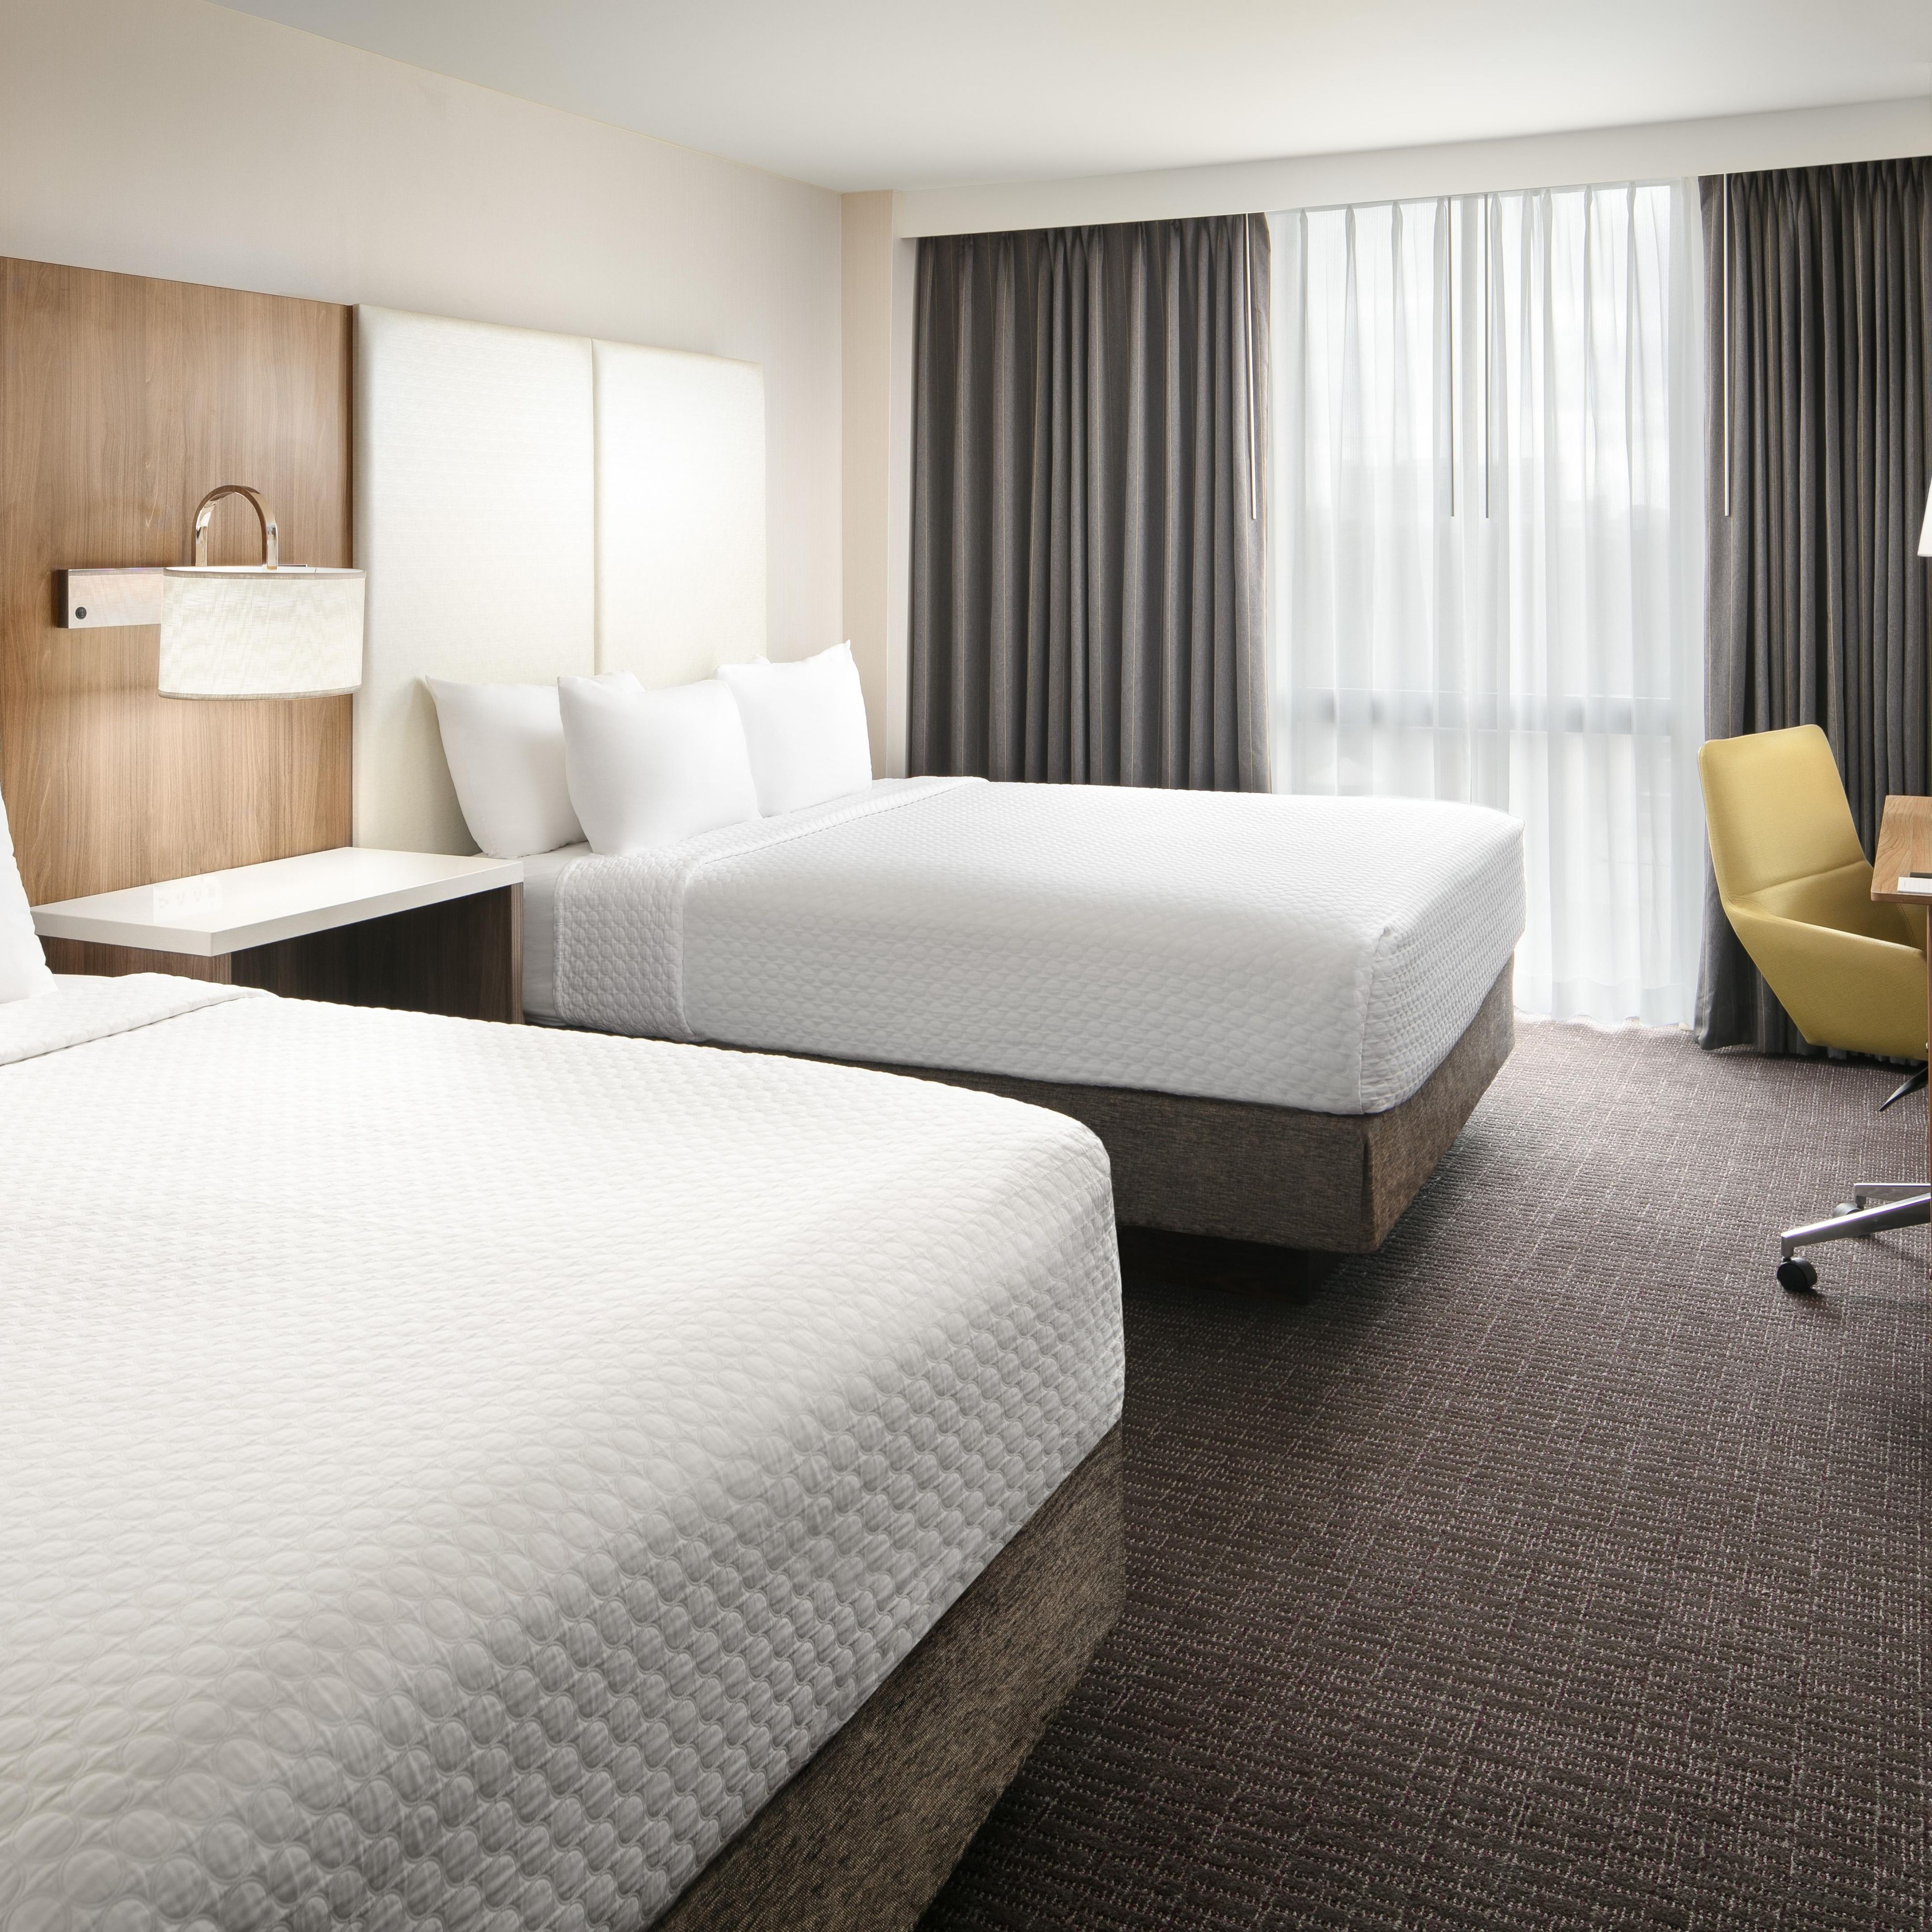 Our stylishly-appointed double rooms can accommodate up to four.